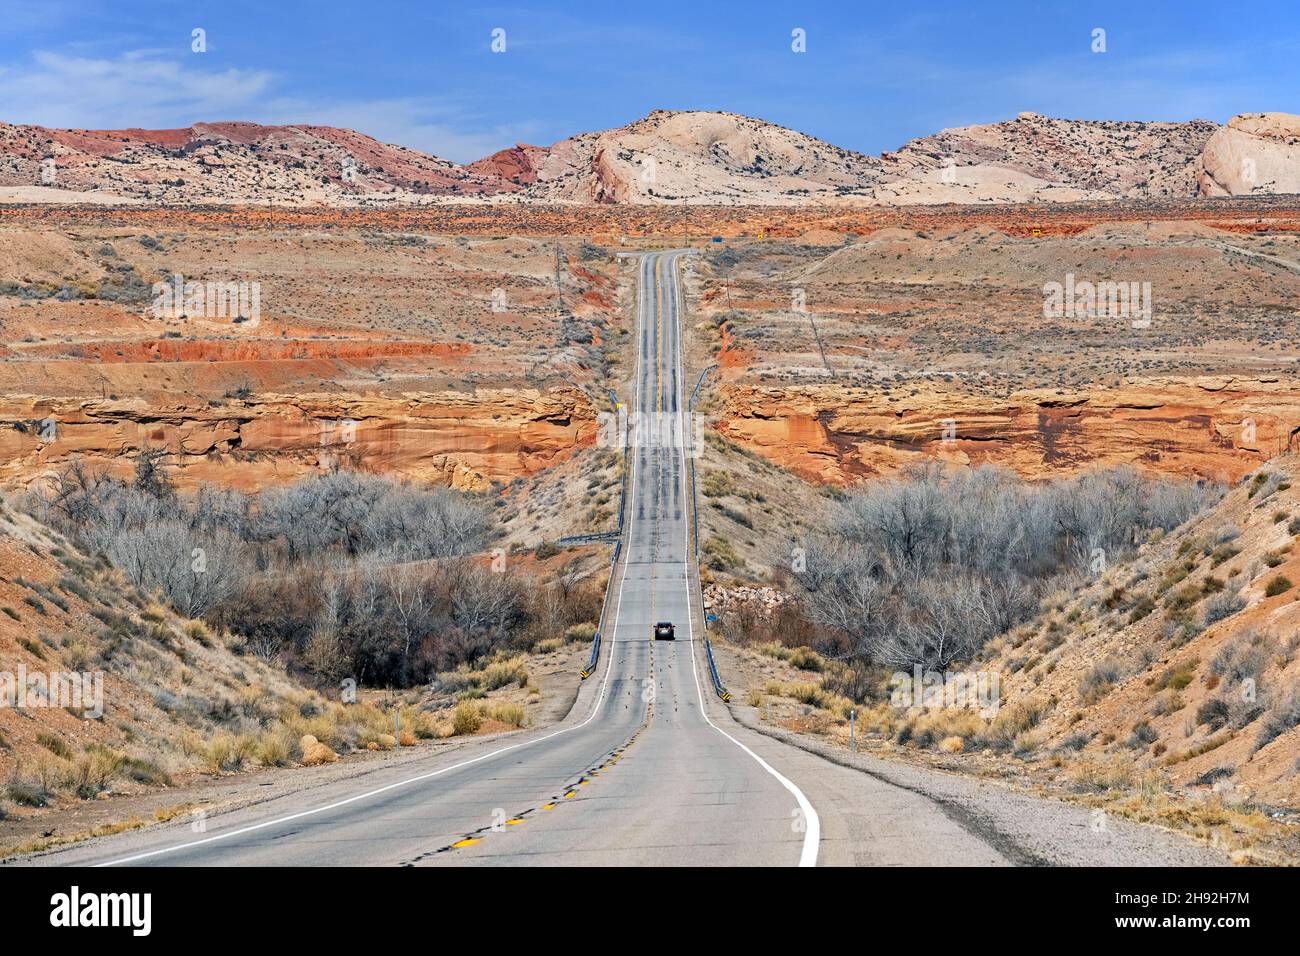 Lonely car driving on the U.S. Route 191 / US 191 highway through Utah's Red Rock Country to Bluff, San Juan County, United States, USA Stock Photo